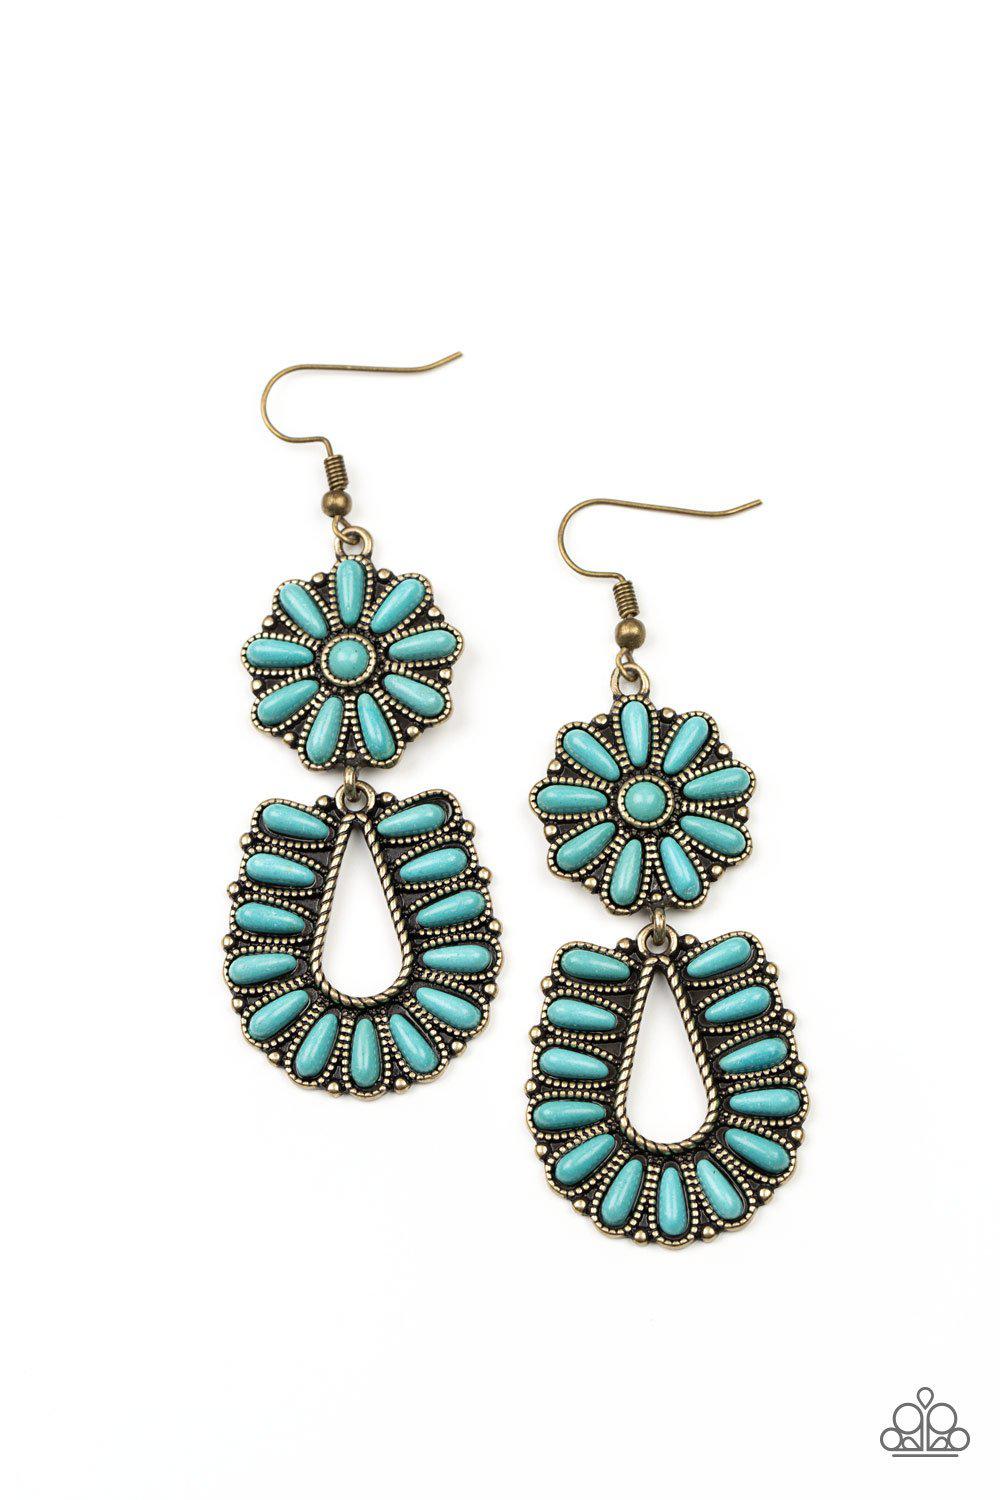 Badlands Eden Brass and Turquoise Blue Stone Earrings - Paparazzi Accessories 2021 Convention Exclusive- lightbox - CarasShop.com - $5 Jewelry by Cara Jewels